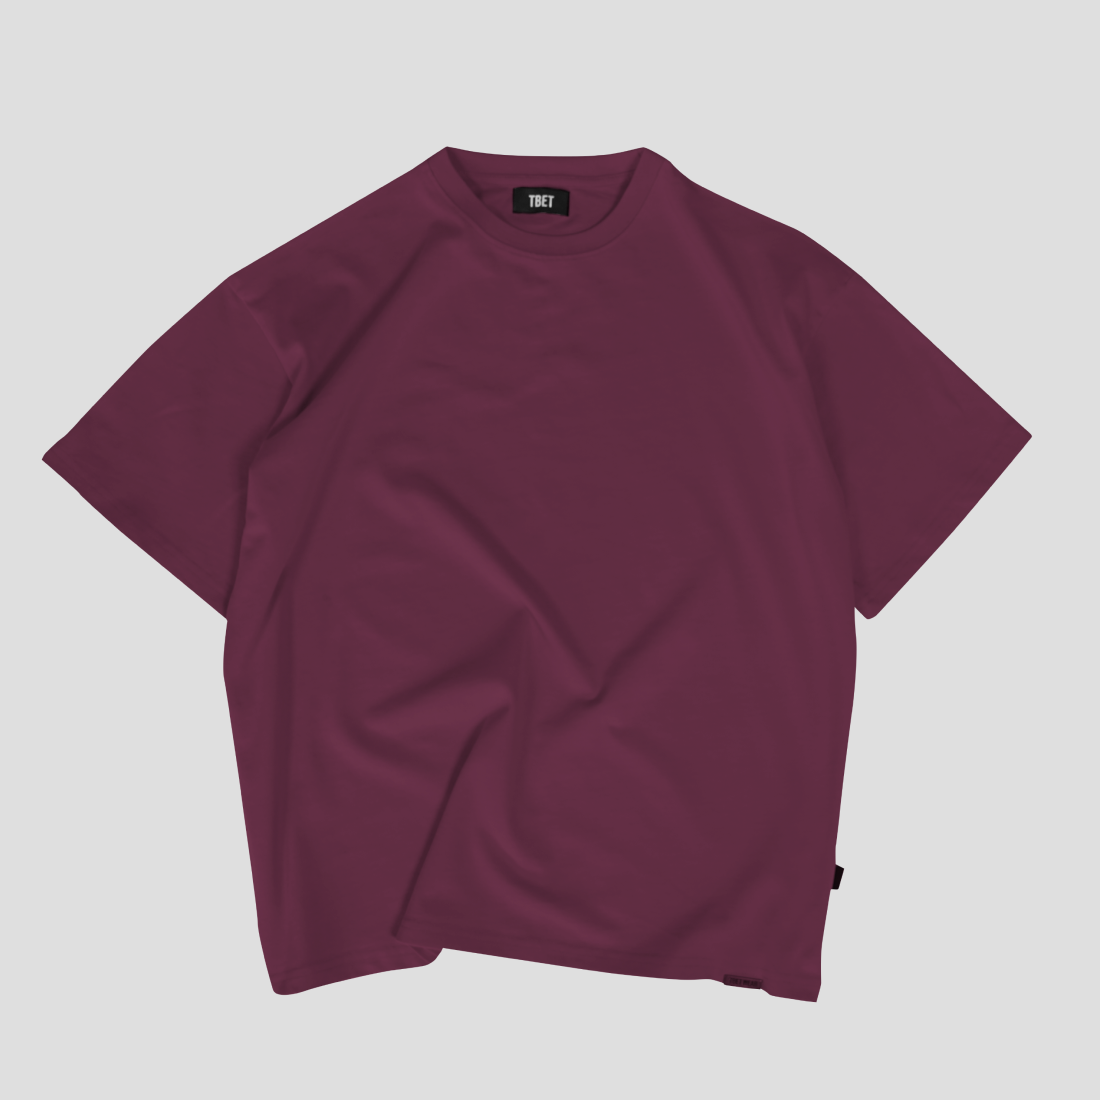 Oversize Blank - Maroon Red